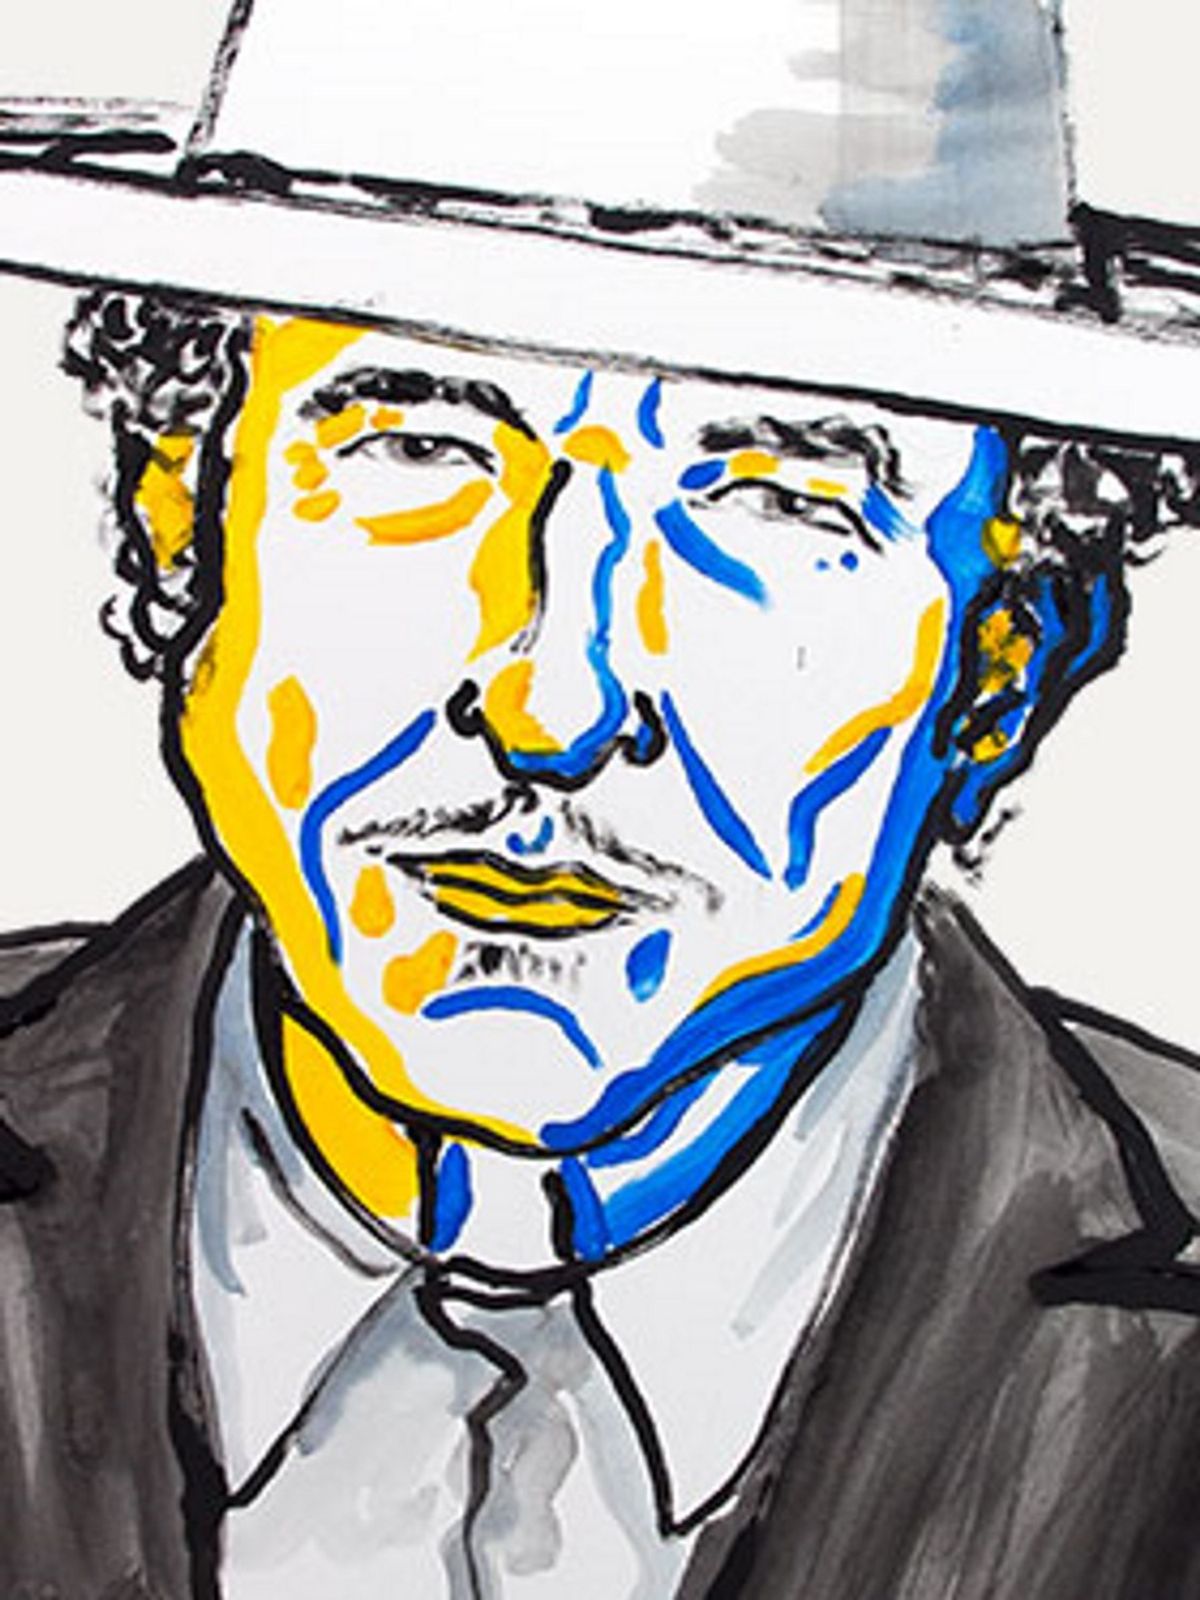 The Importance Of Bob Dylan's Nobel Prize In Literature